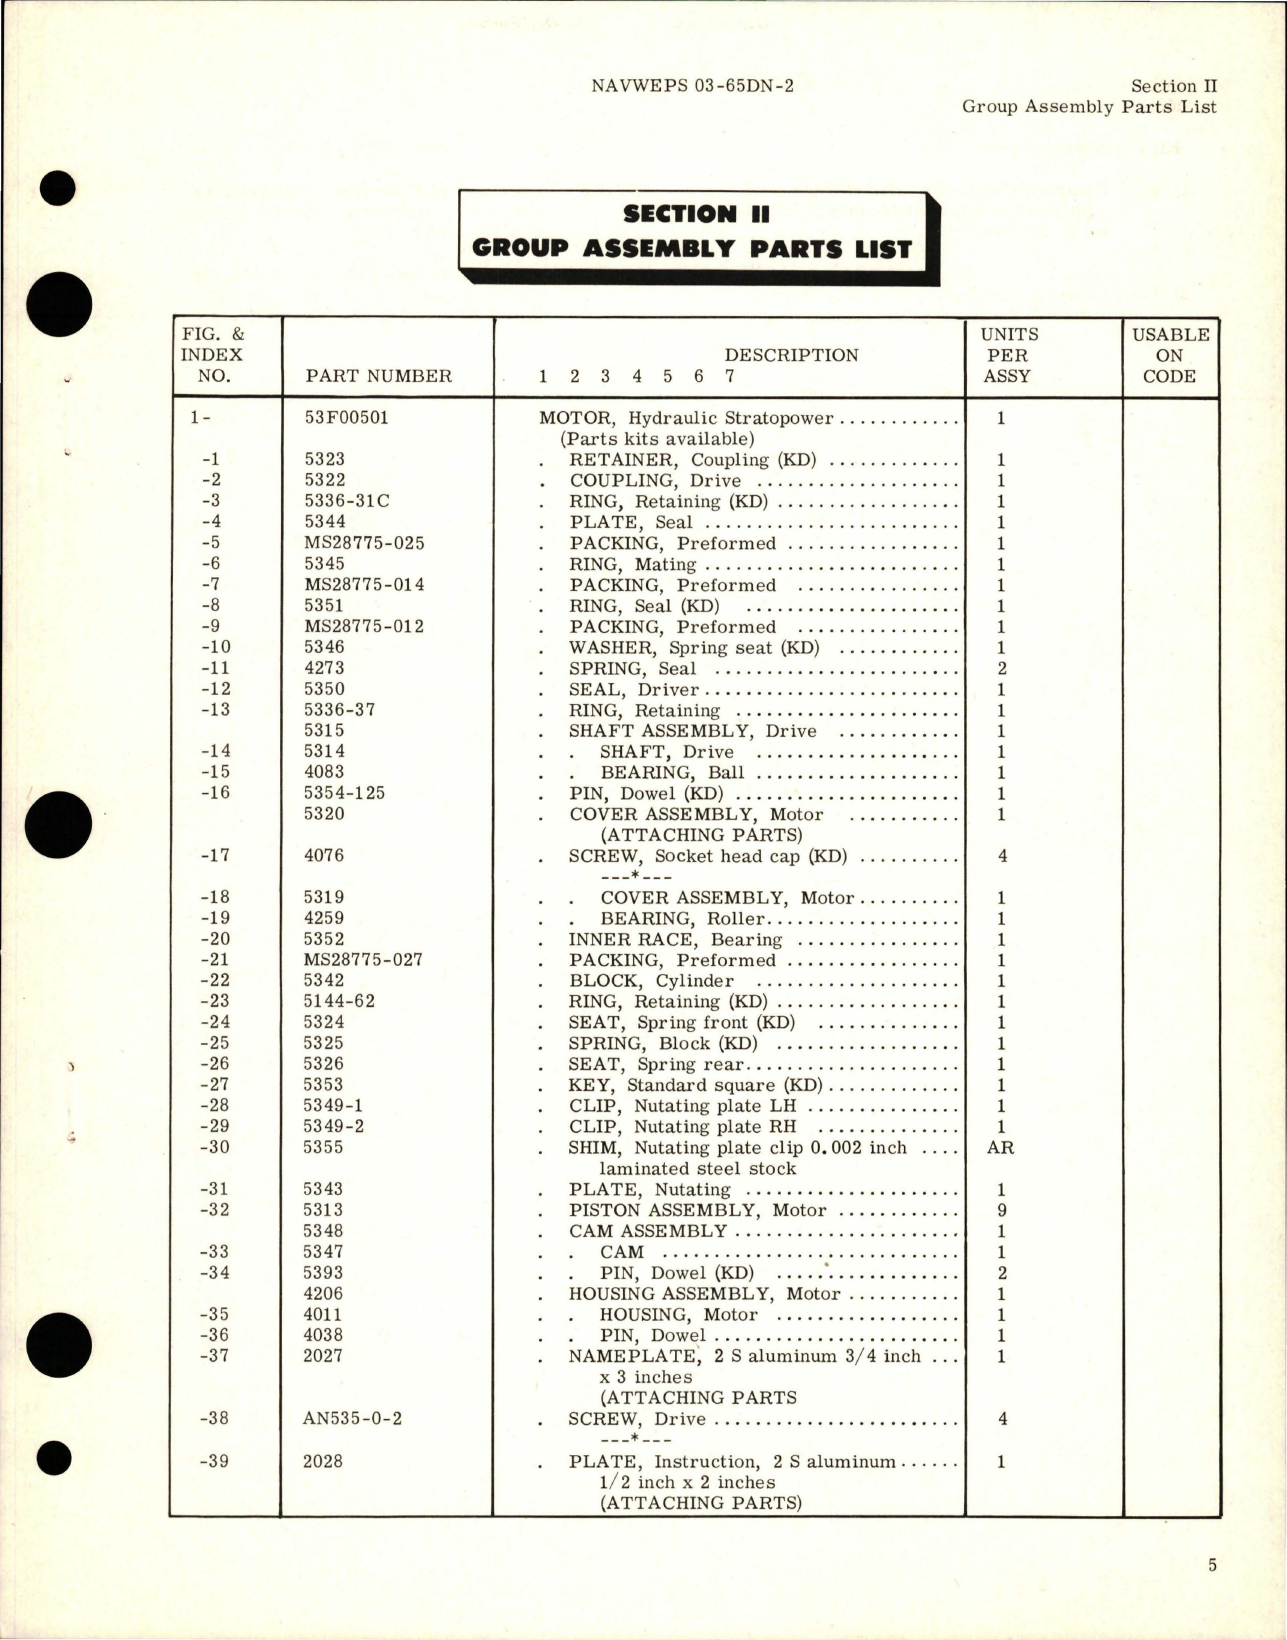 Sample page 7 from AirCorps Library document: Illustrated Parts Breakdown for Stratopower Hydraulic Motor - Model 53F00501 